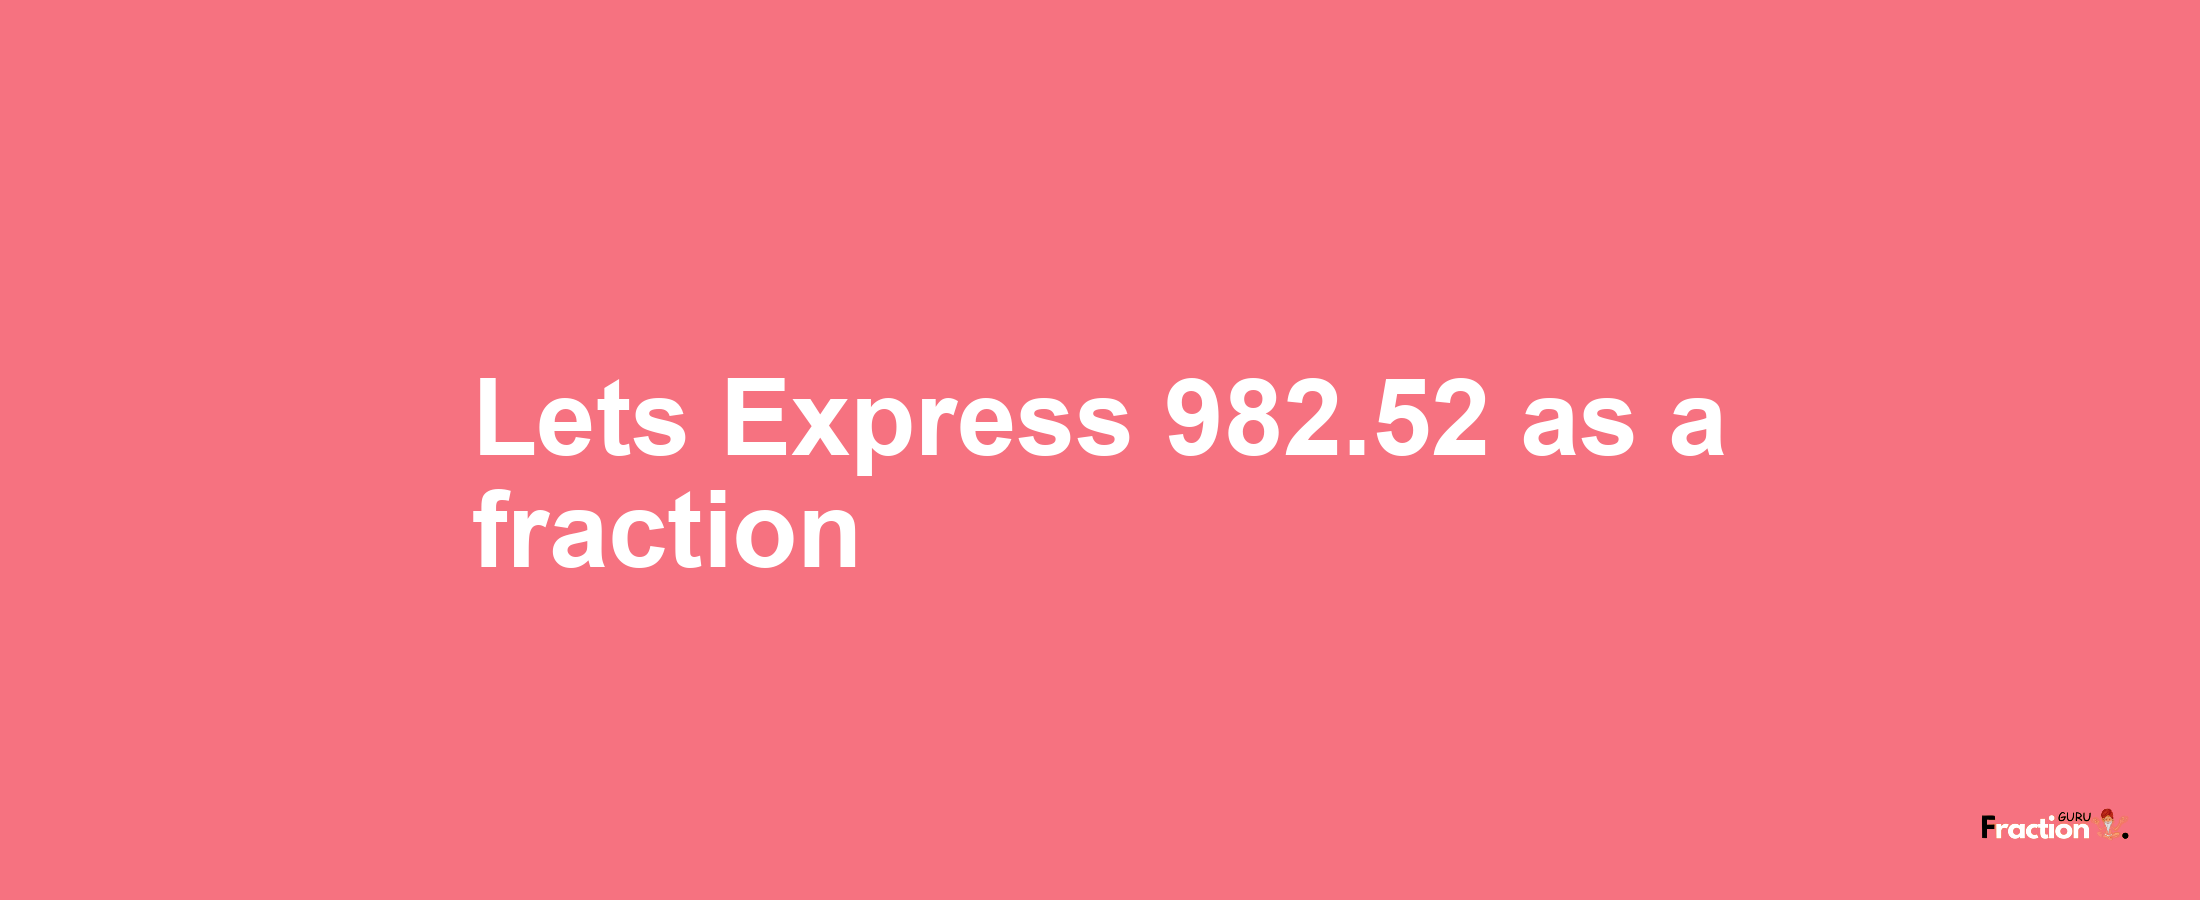 Lets Express 982.52 as afraction